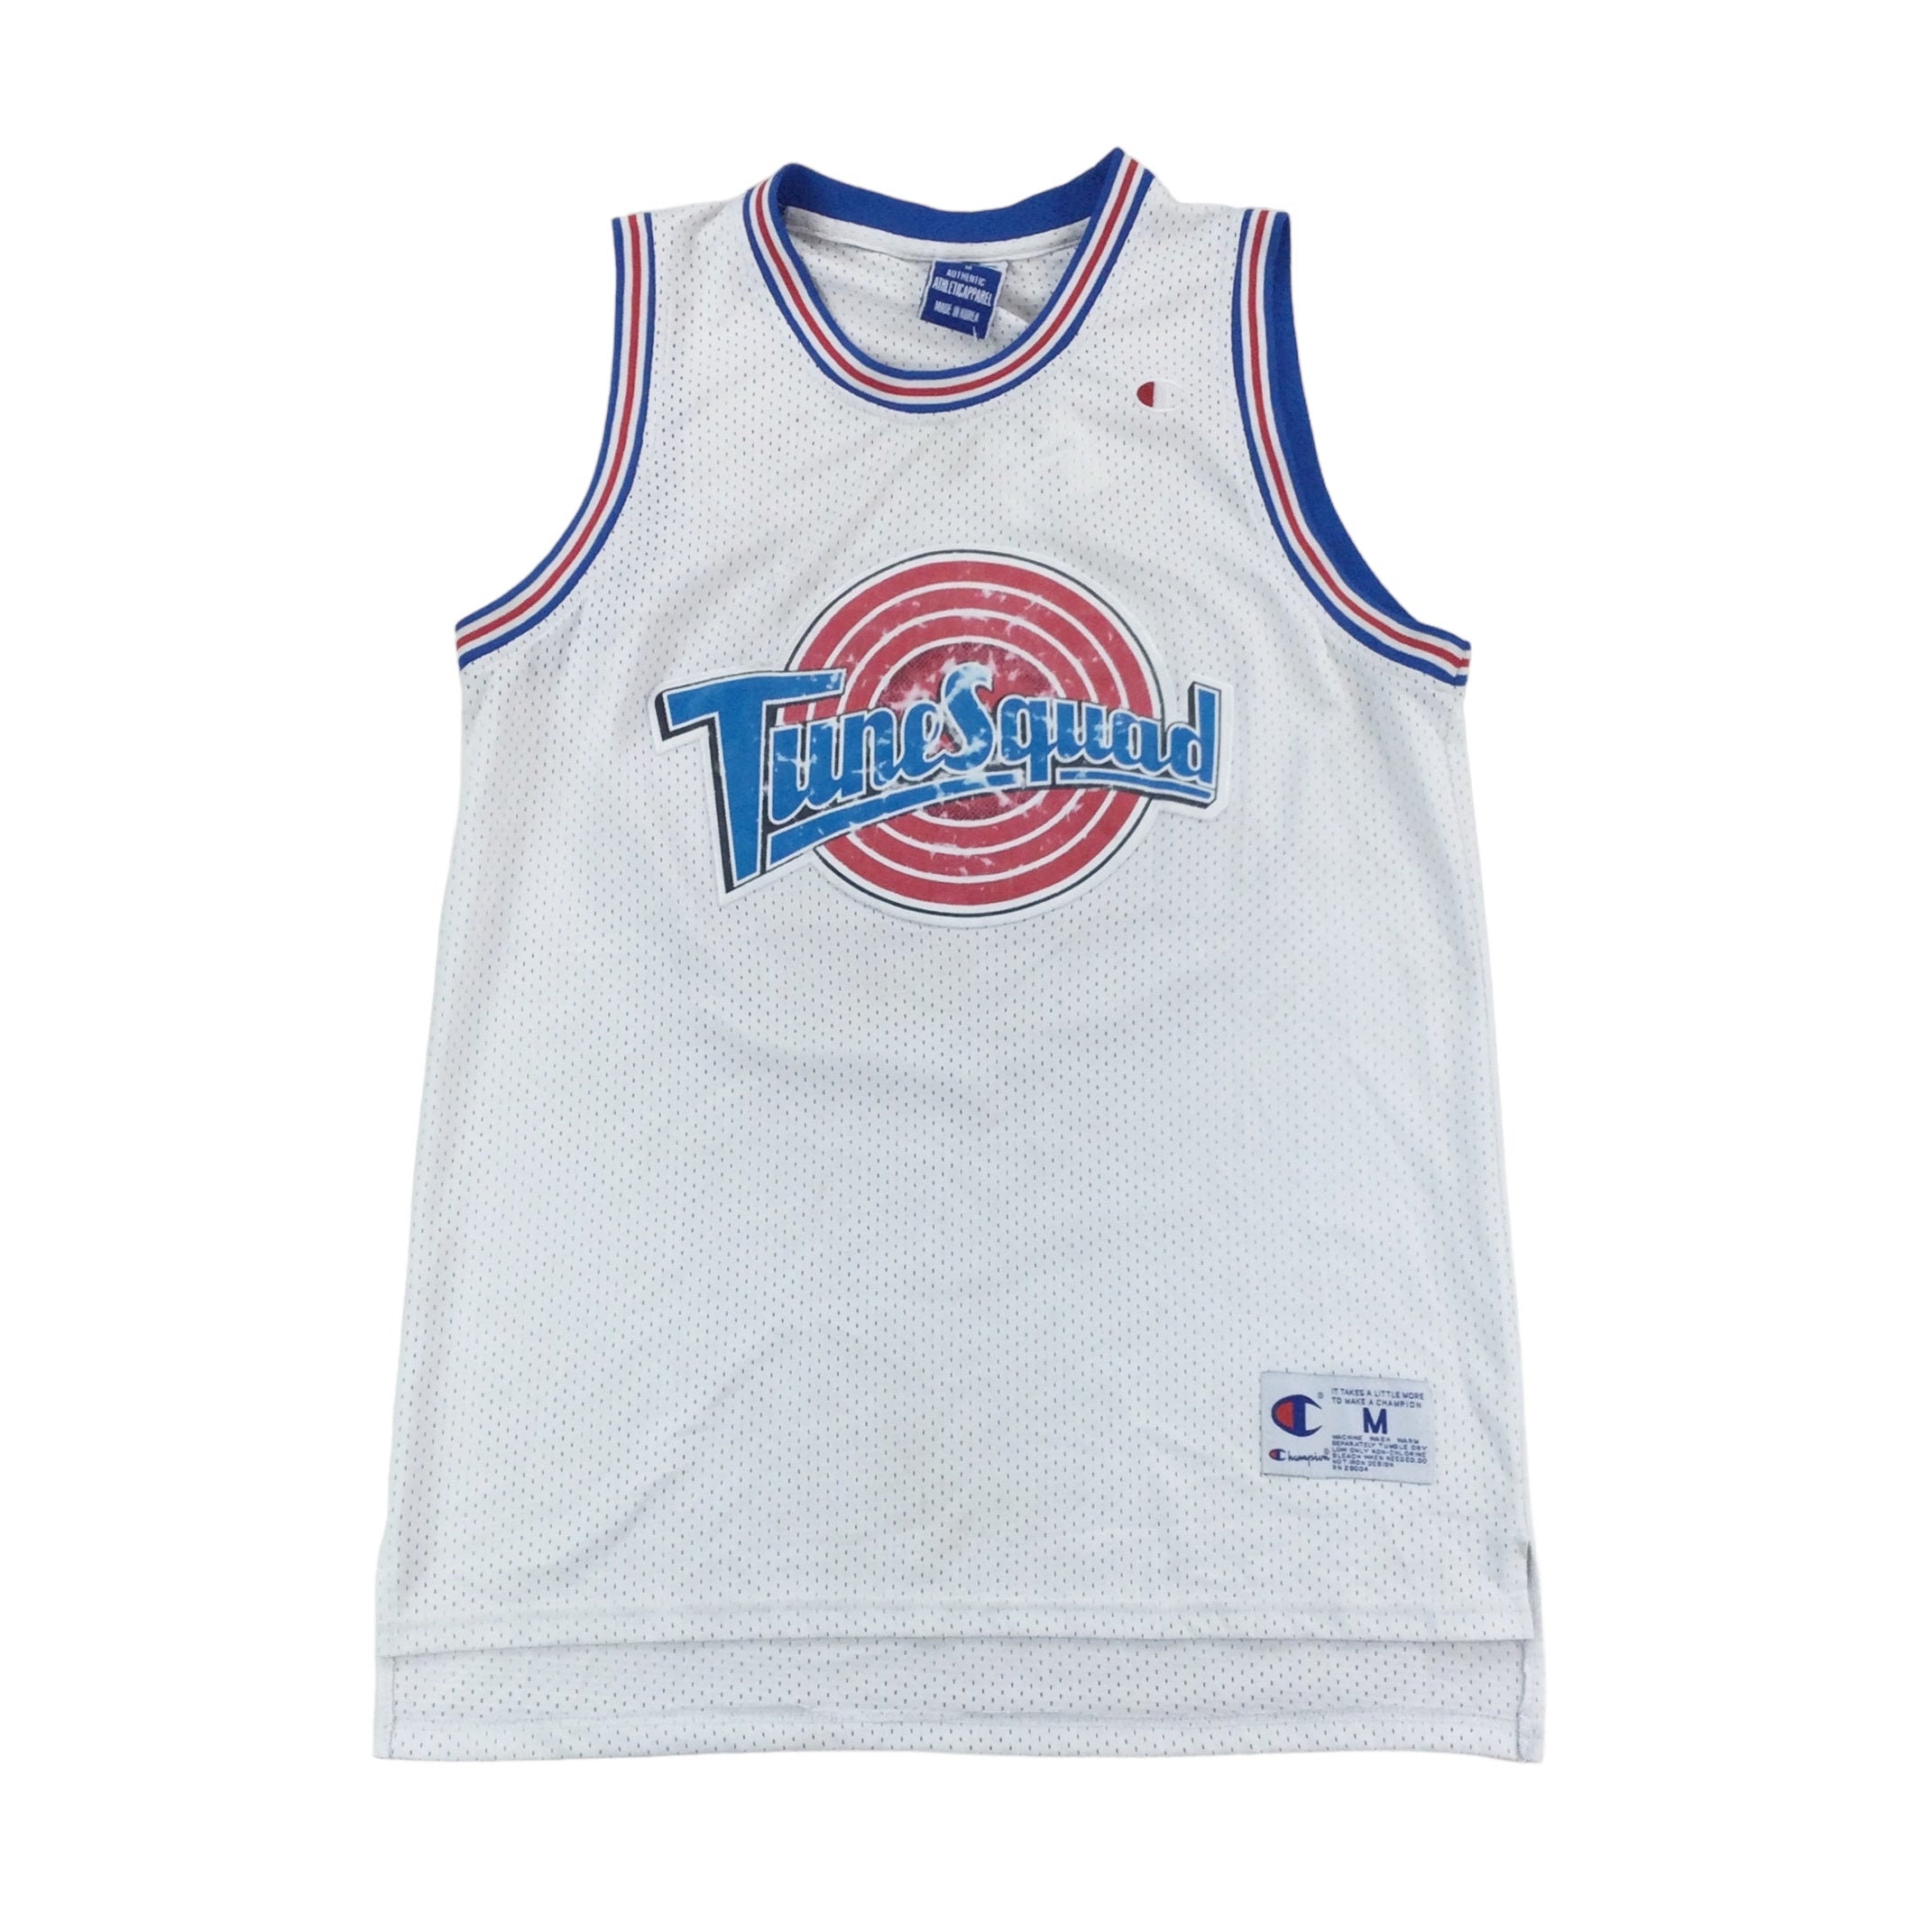 tune squad Reversible Basketball Jersey